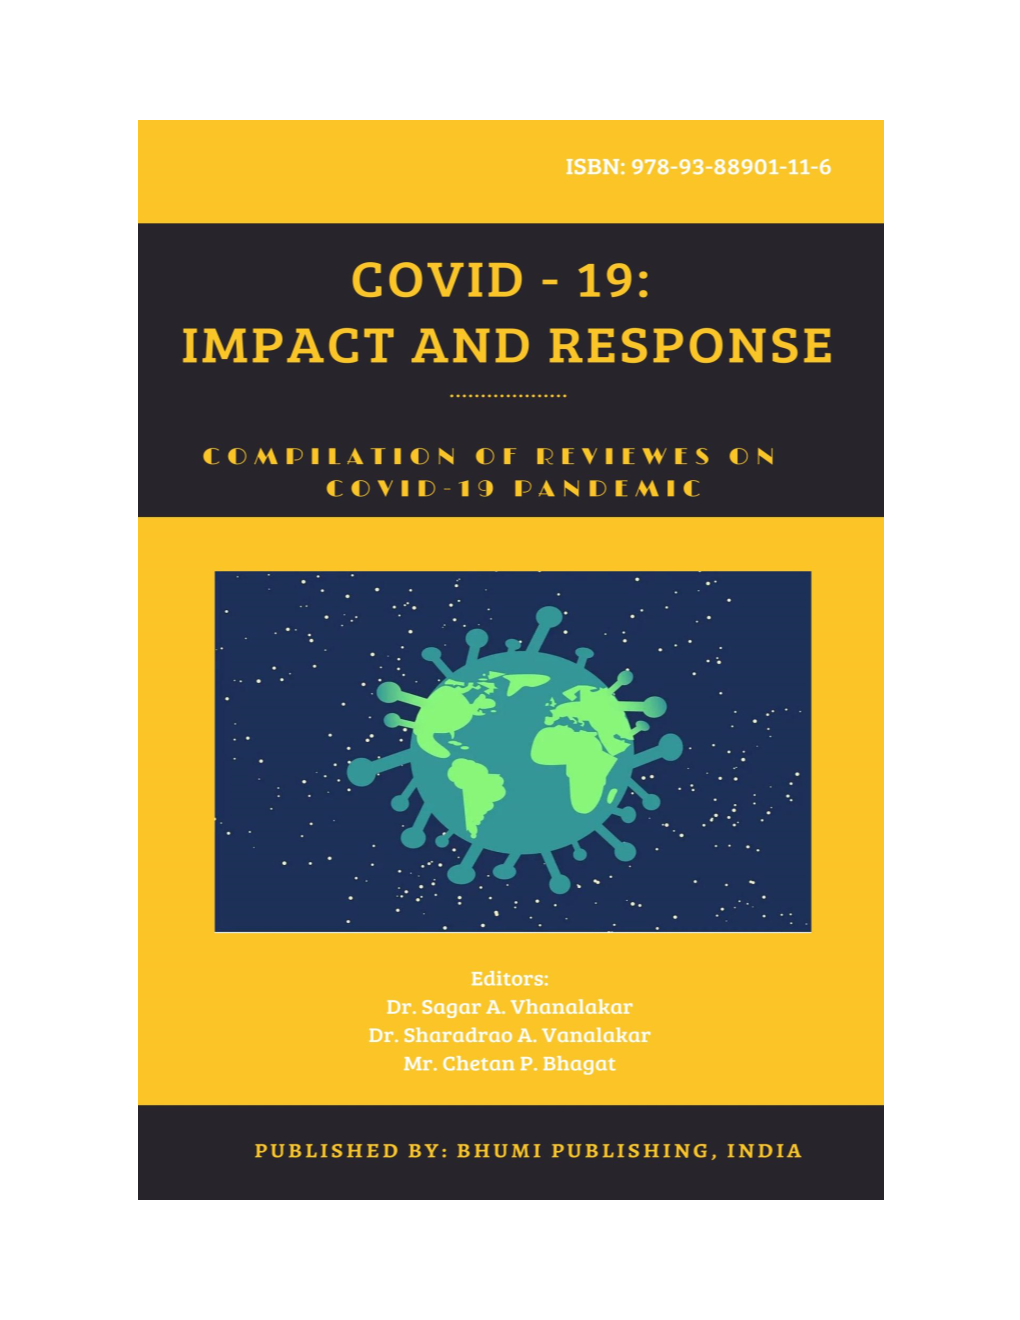 COVID-19 Has Caused Disruptions in the Lives and Customs of People with Significant Impact on the Economies of Nations